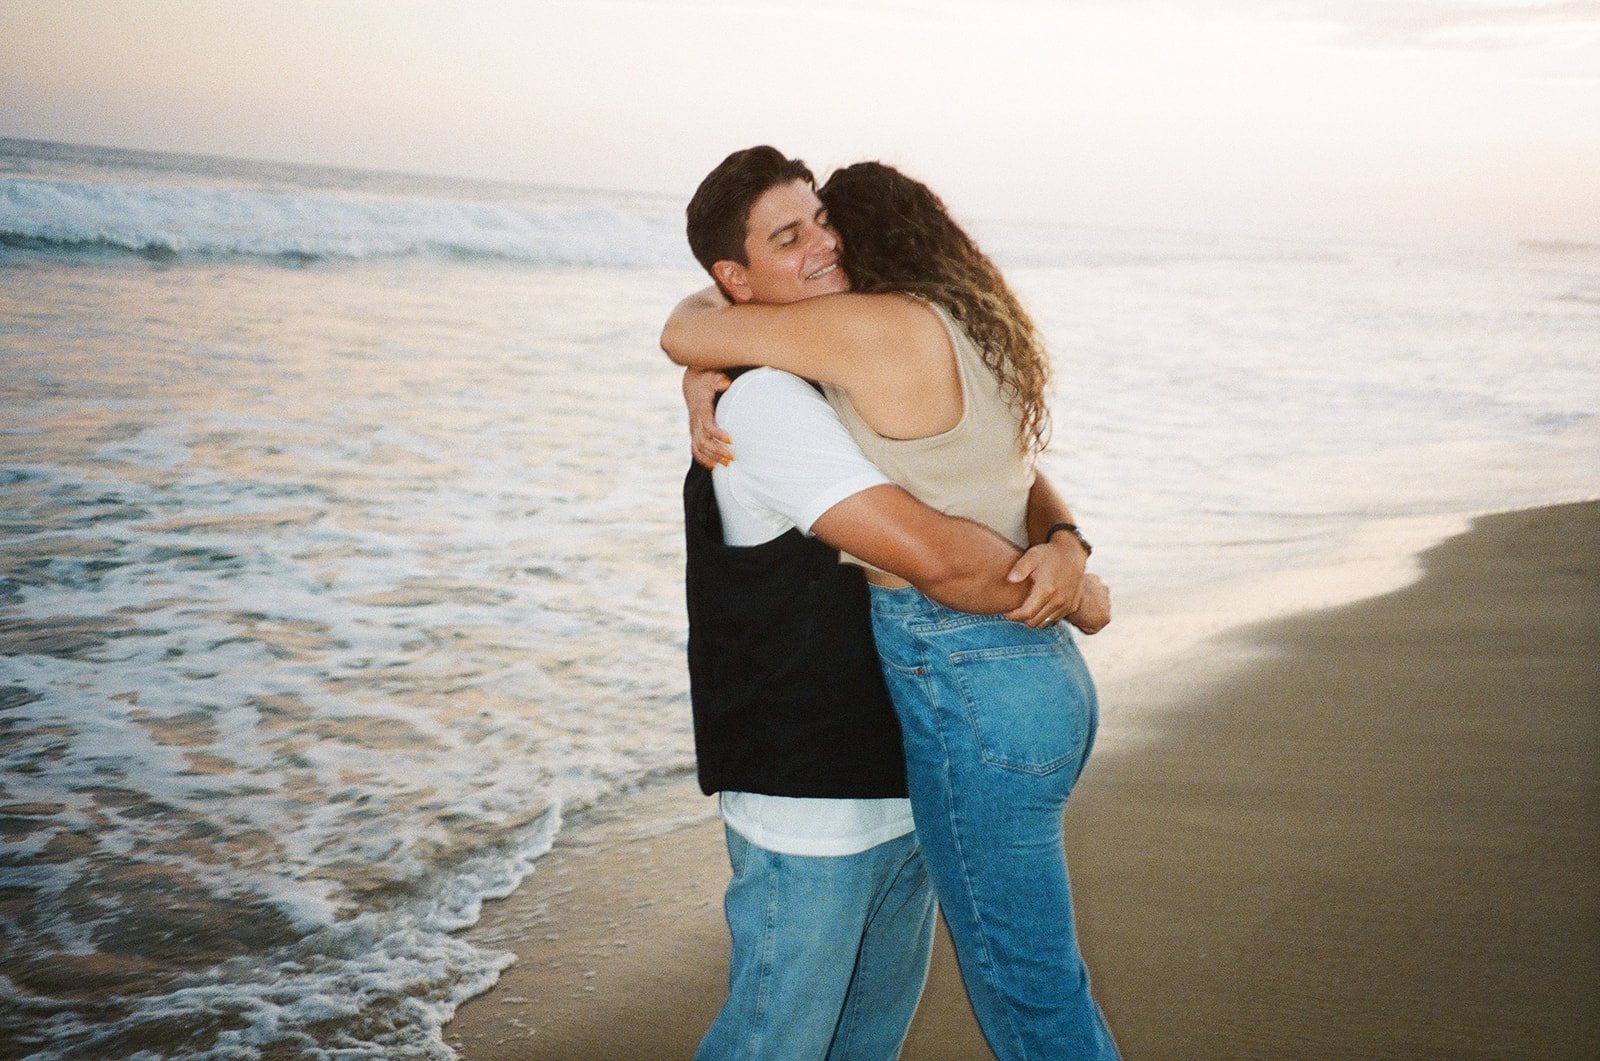 Newport Beach engagement photo session with cute couple hugging on the beach during golden hour on film